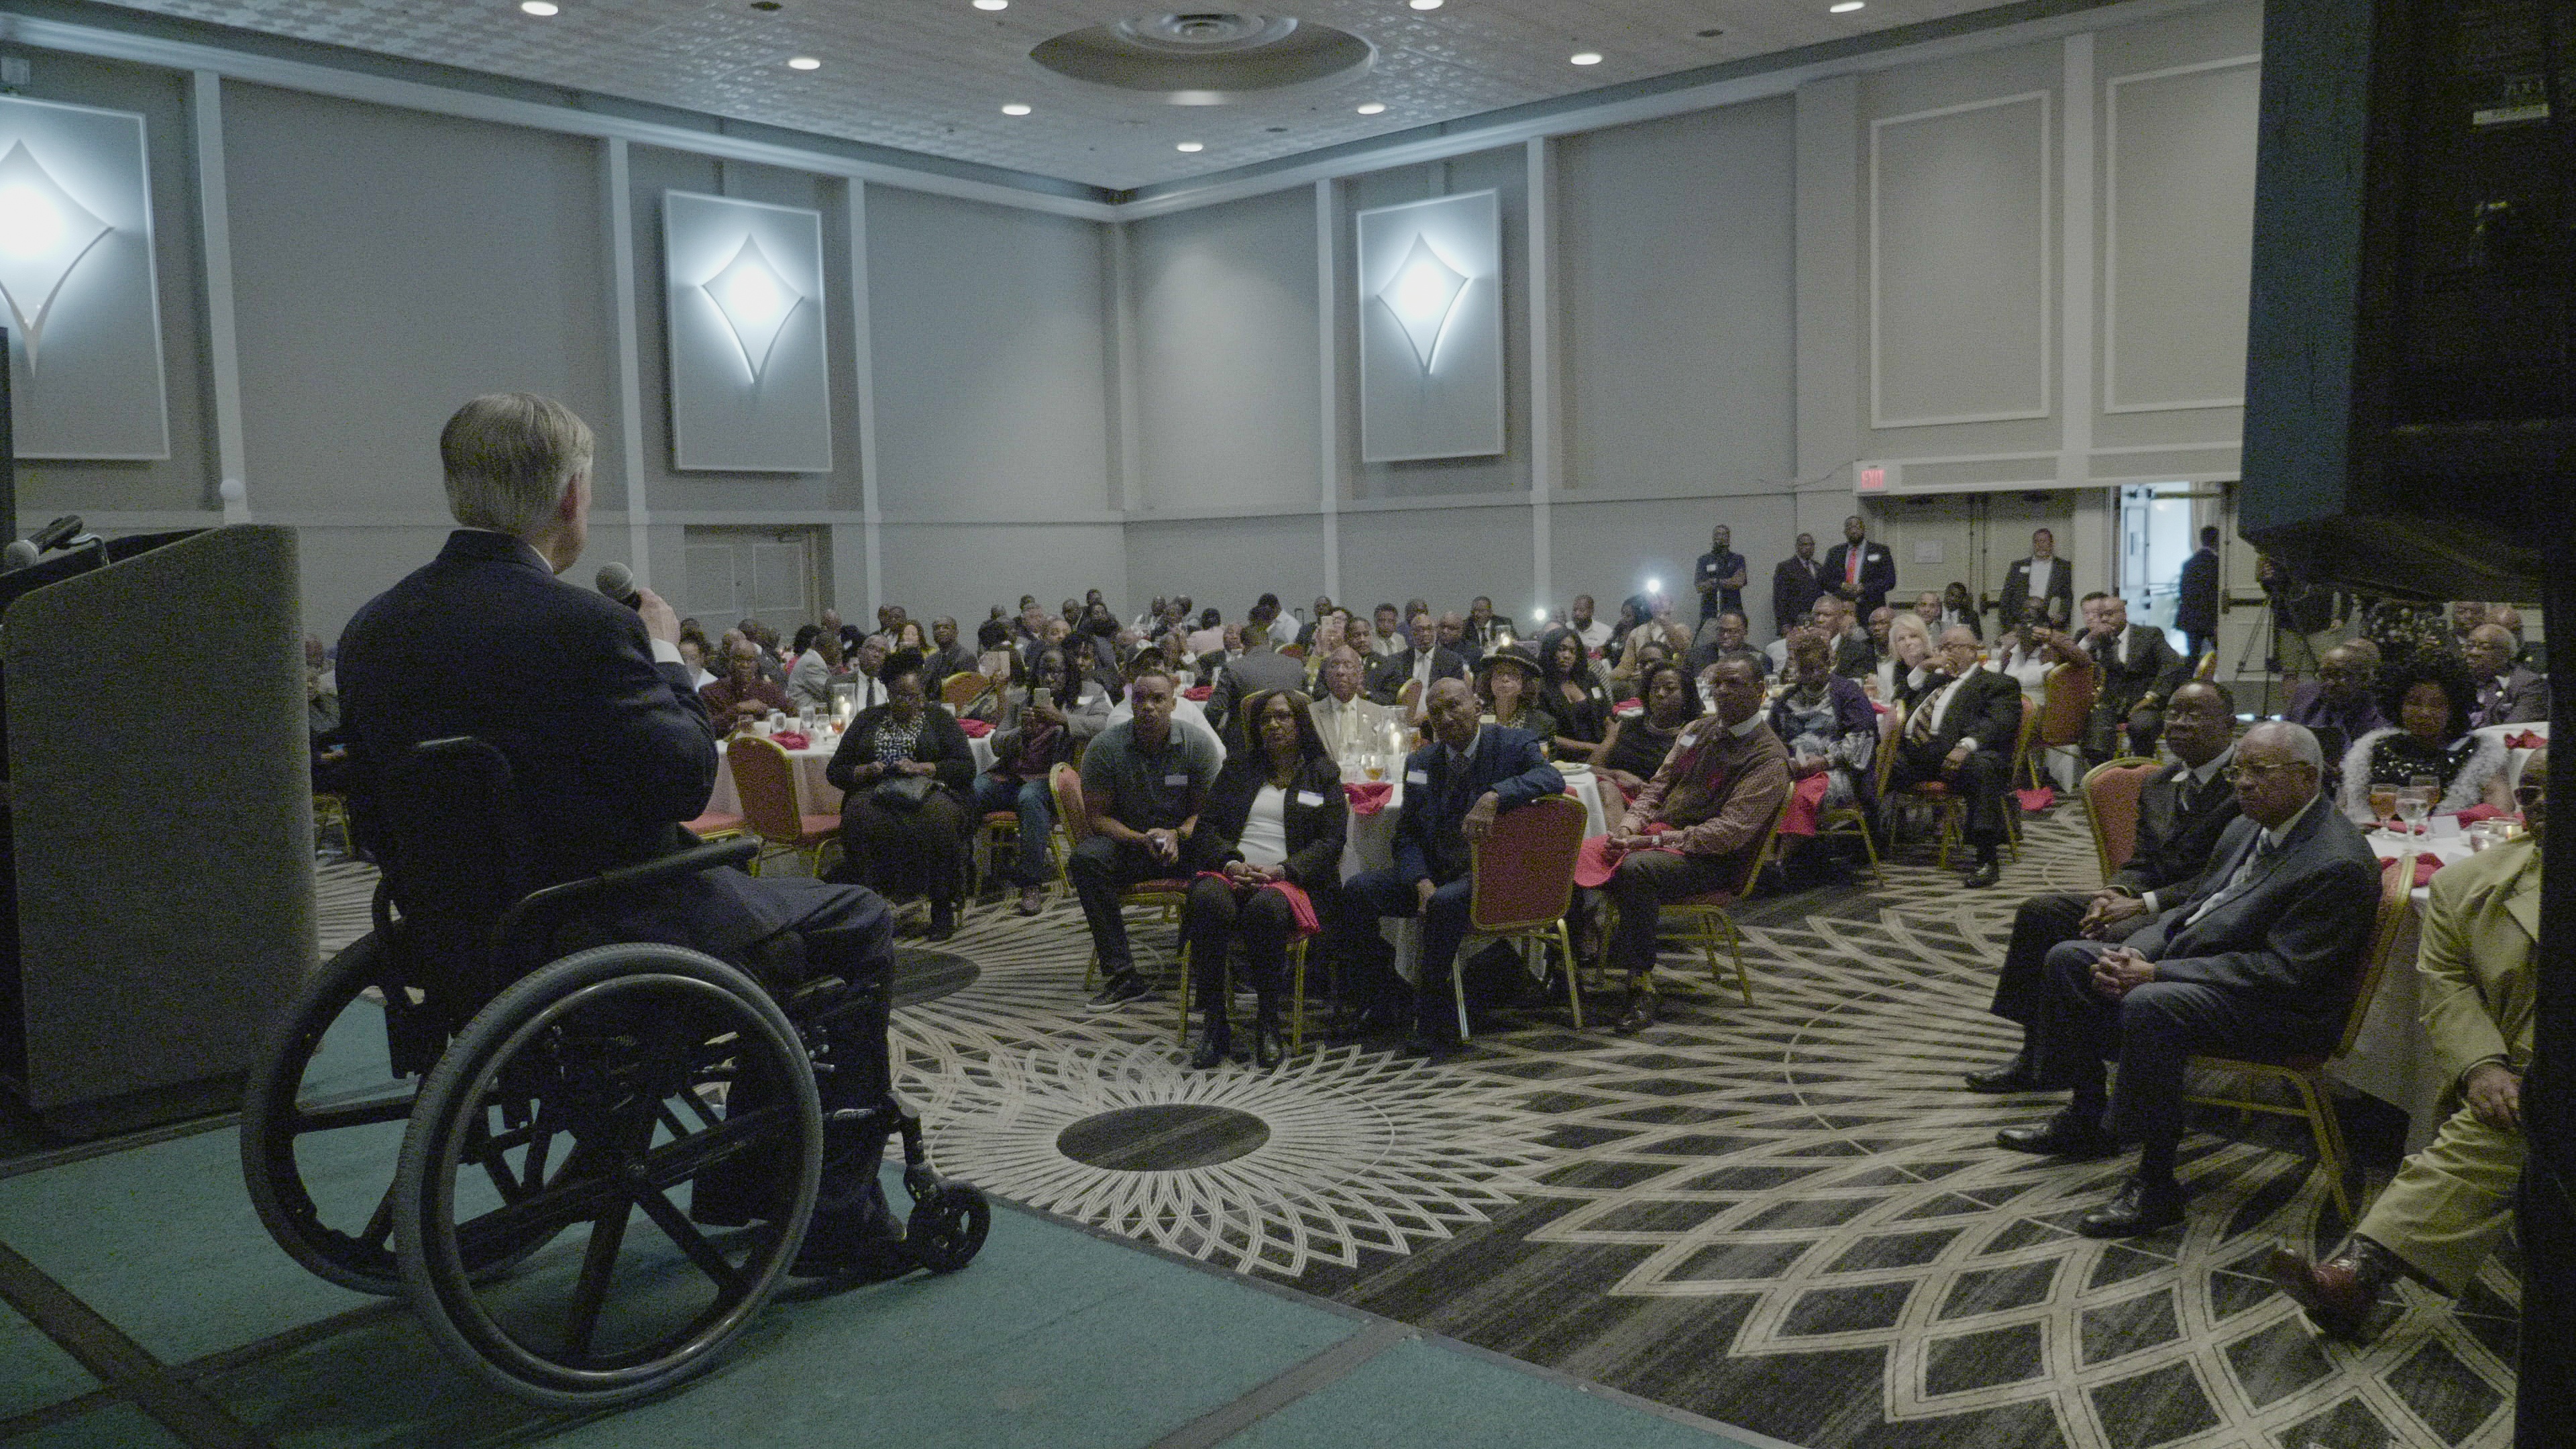 Governor Abbott Hosts African American Leaders Luncheon In Houston